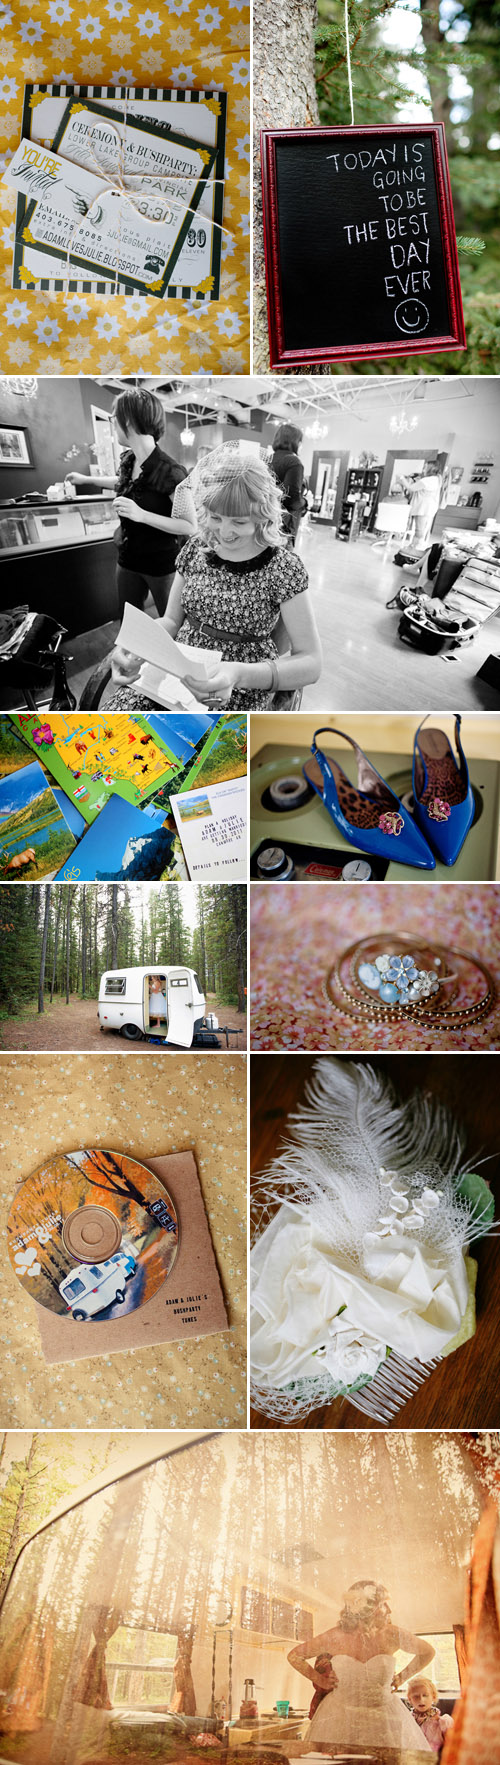 camping inspired Alberta, Canada wedding photographed by Eunice Montenegro, Christina Craft, Stacey Hedman, Kira Nelson and Tessa Perkins